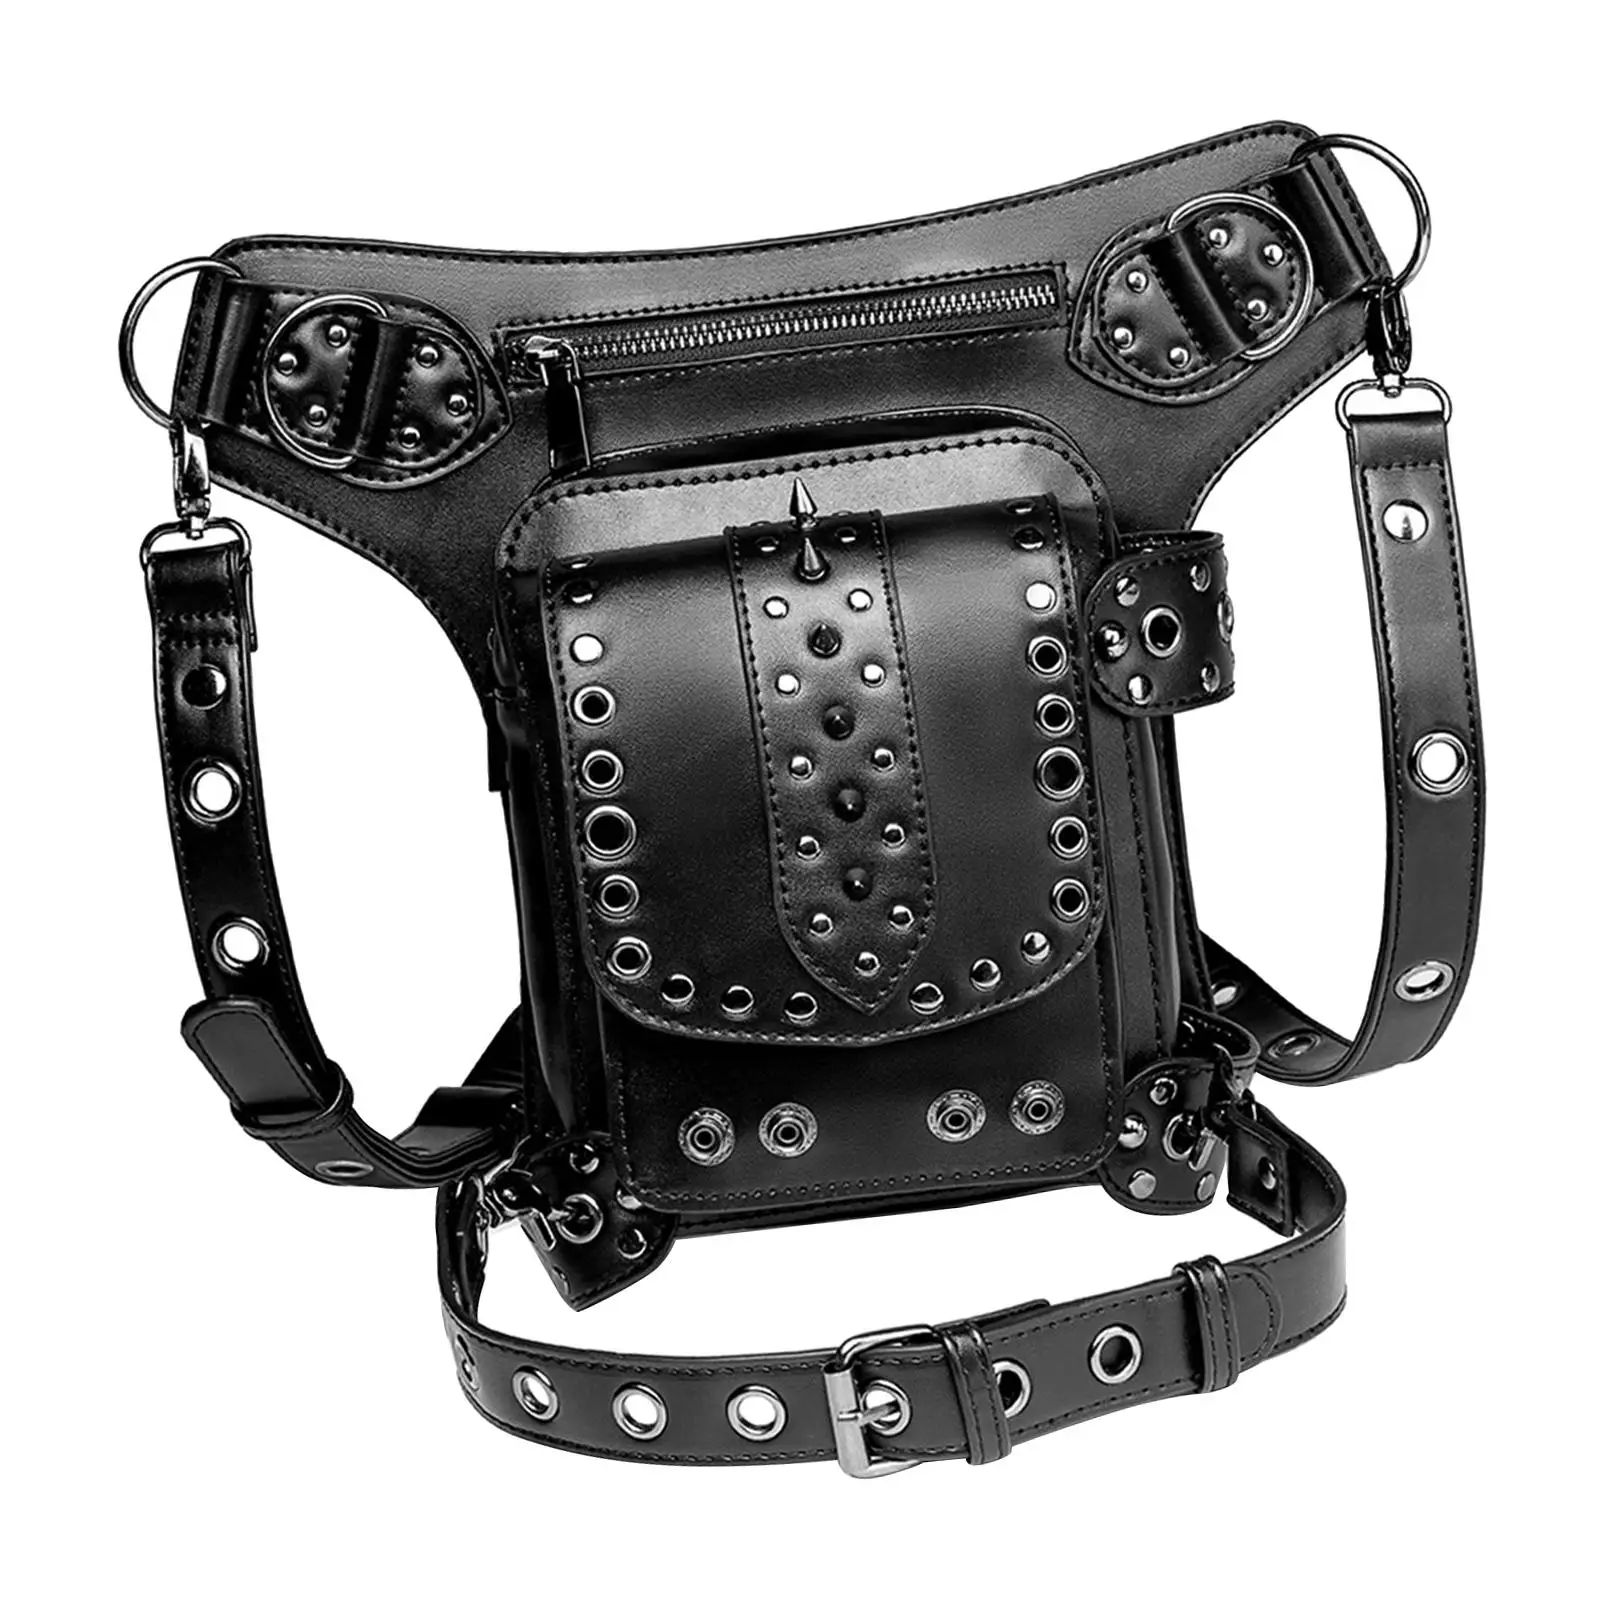 Gothic Steampunk Waist Bag with Detachable Strap Leg Hip Pack Fashion Waist Pack Purse for Running Cycling Motorcycle Climbing